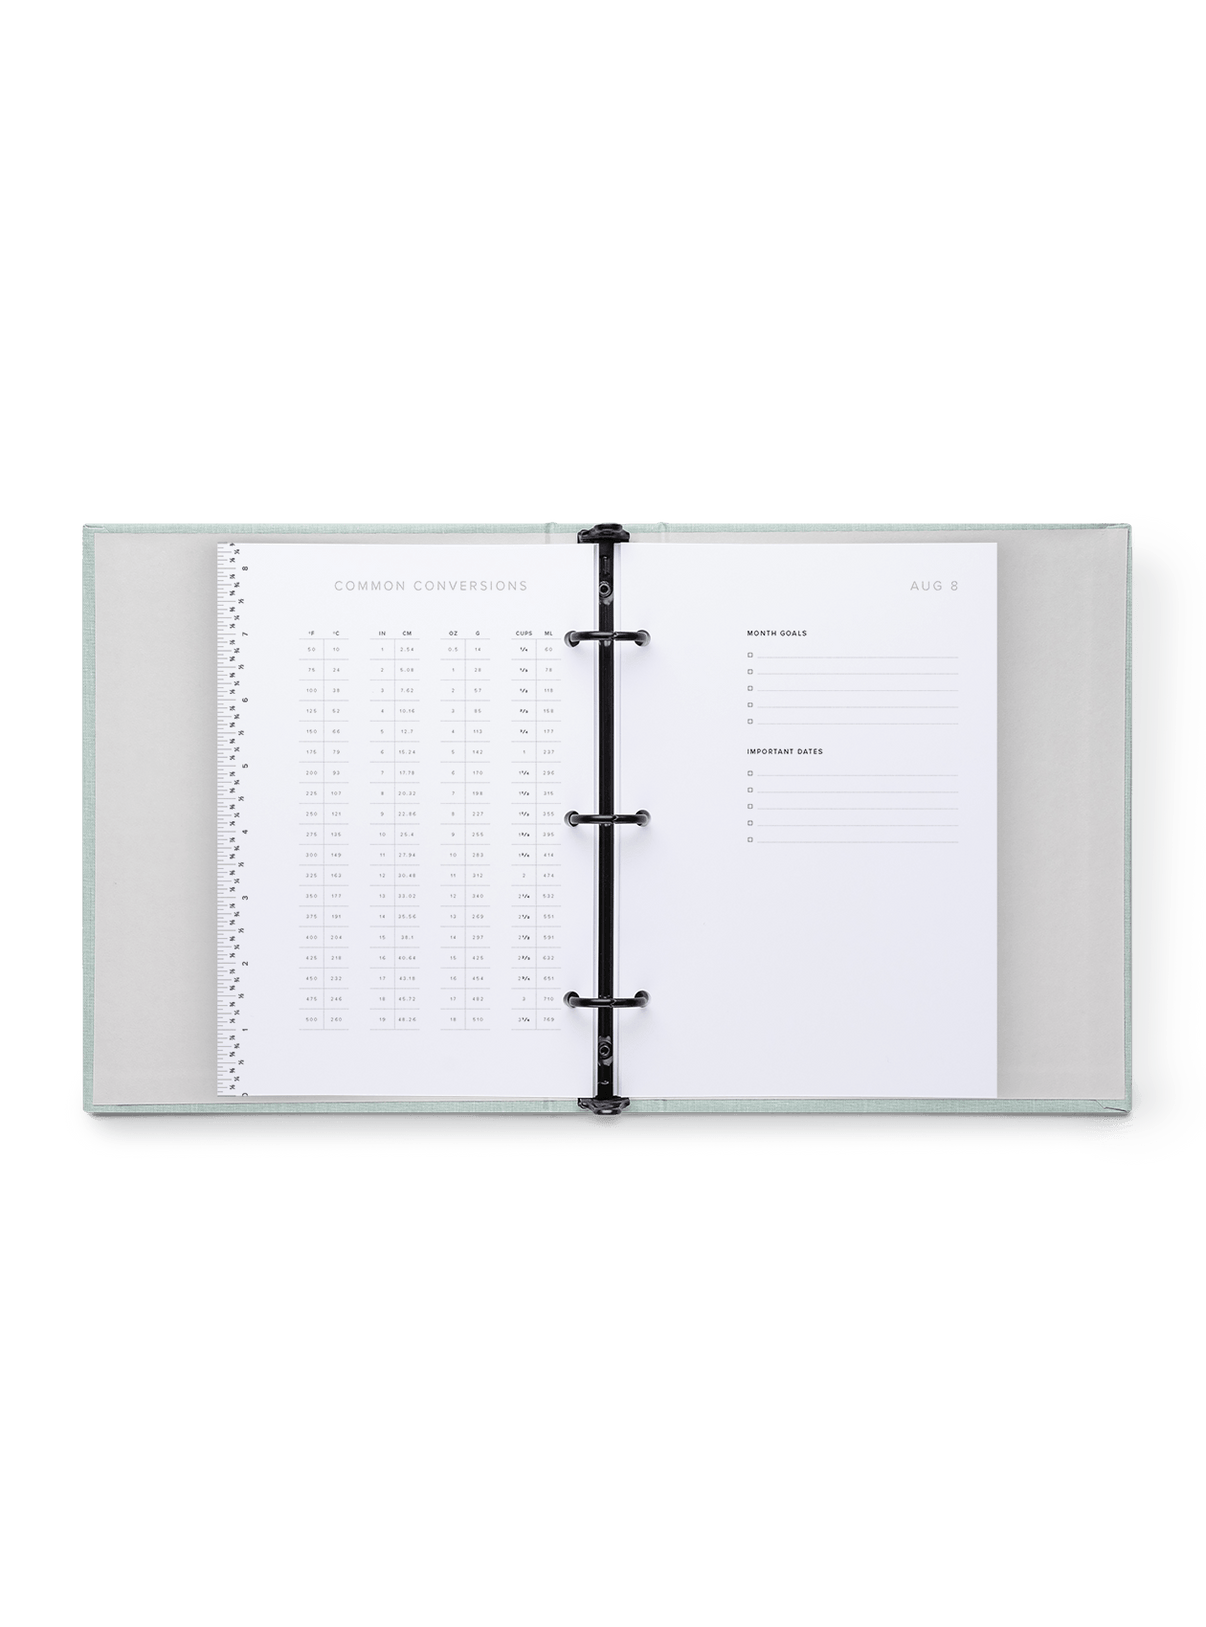 Compact Binder Planner interior  conversion chart and month goals view